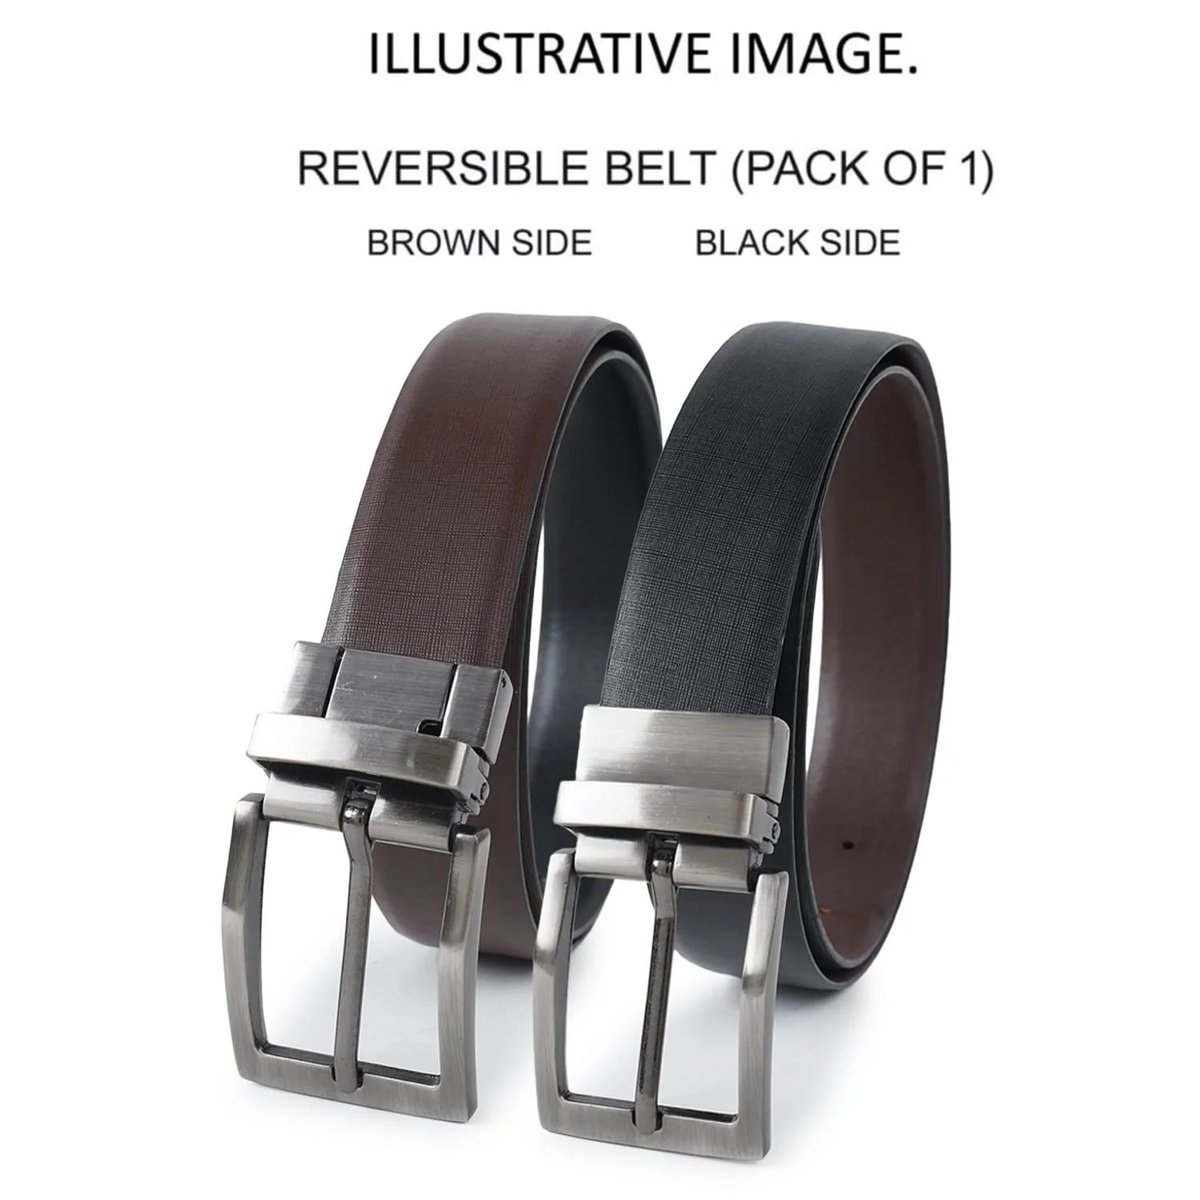 'CIMONI's Leather Belt: Your ticket to embracing versatile elegance. Elevate your ensemble, redefine your style, one reversible choice at a time. 👞👔 #VersatileChic #CIMONI'

cimoni.com/collections/be…